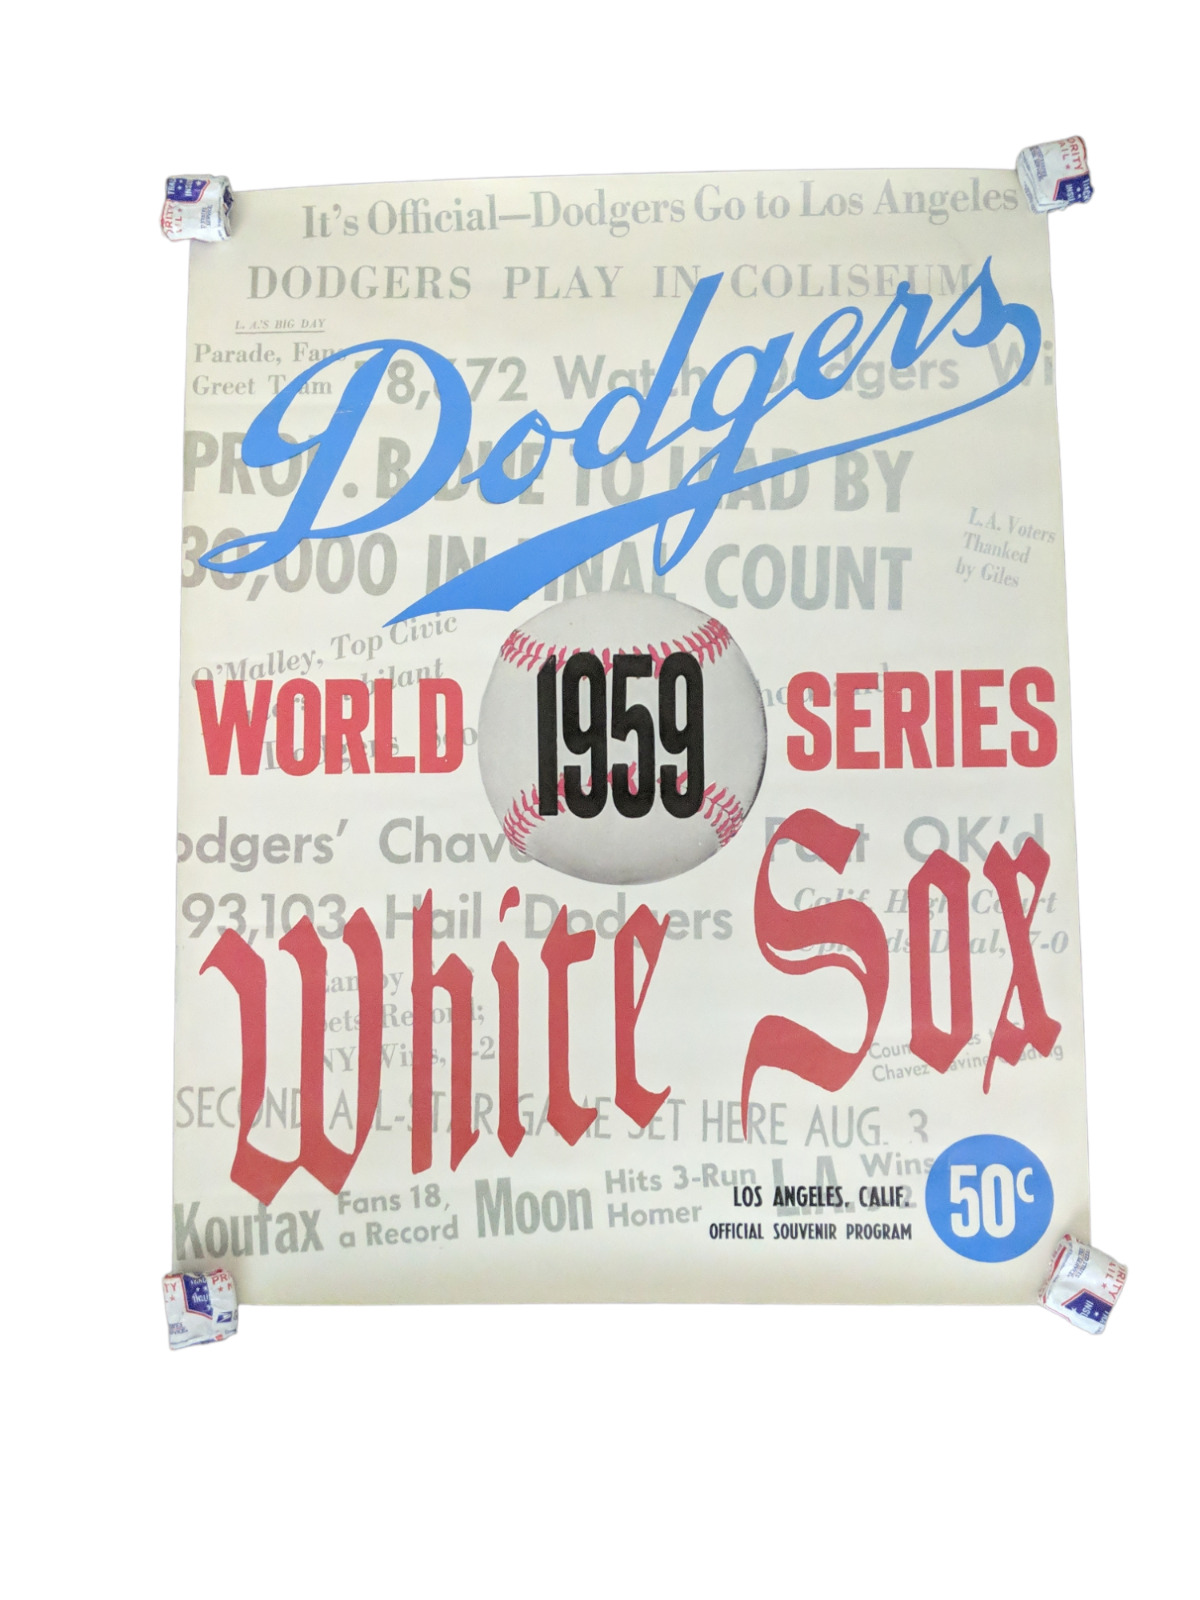 Poster Dodgers World 1959 Series White Sox Sports Store Poster 28X22 Vintage